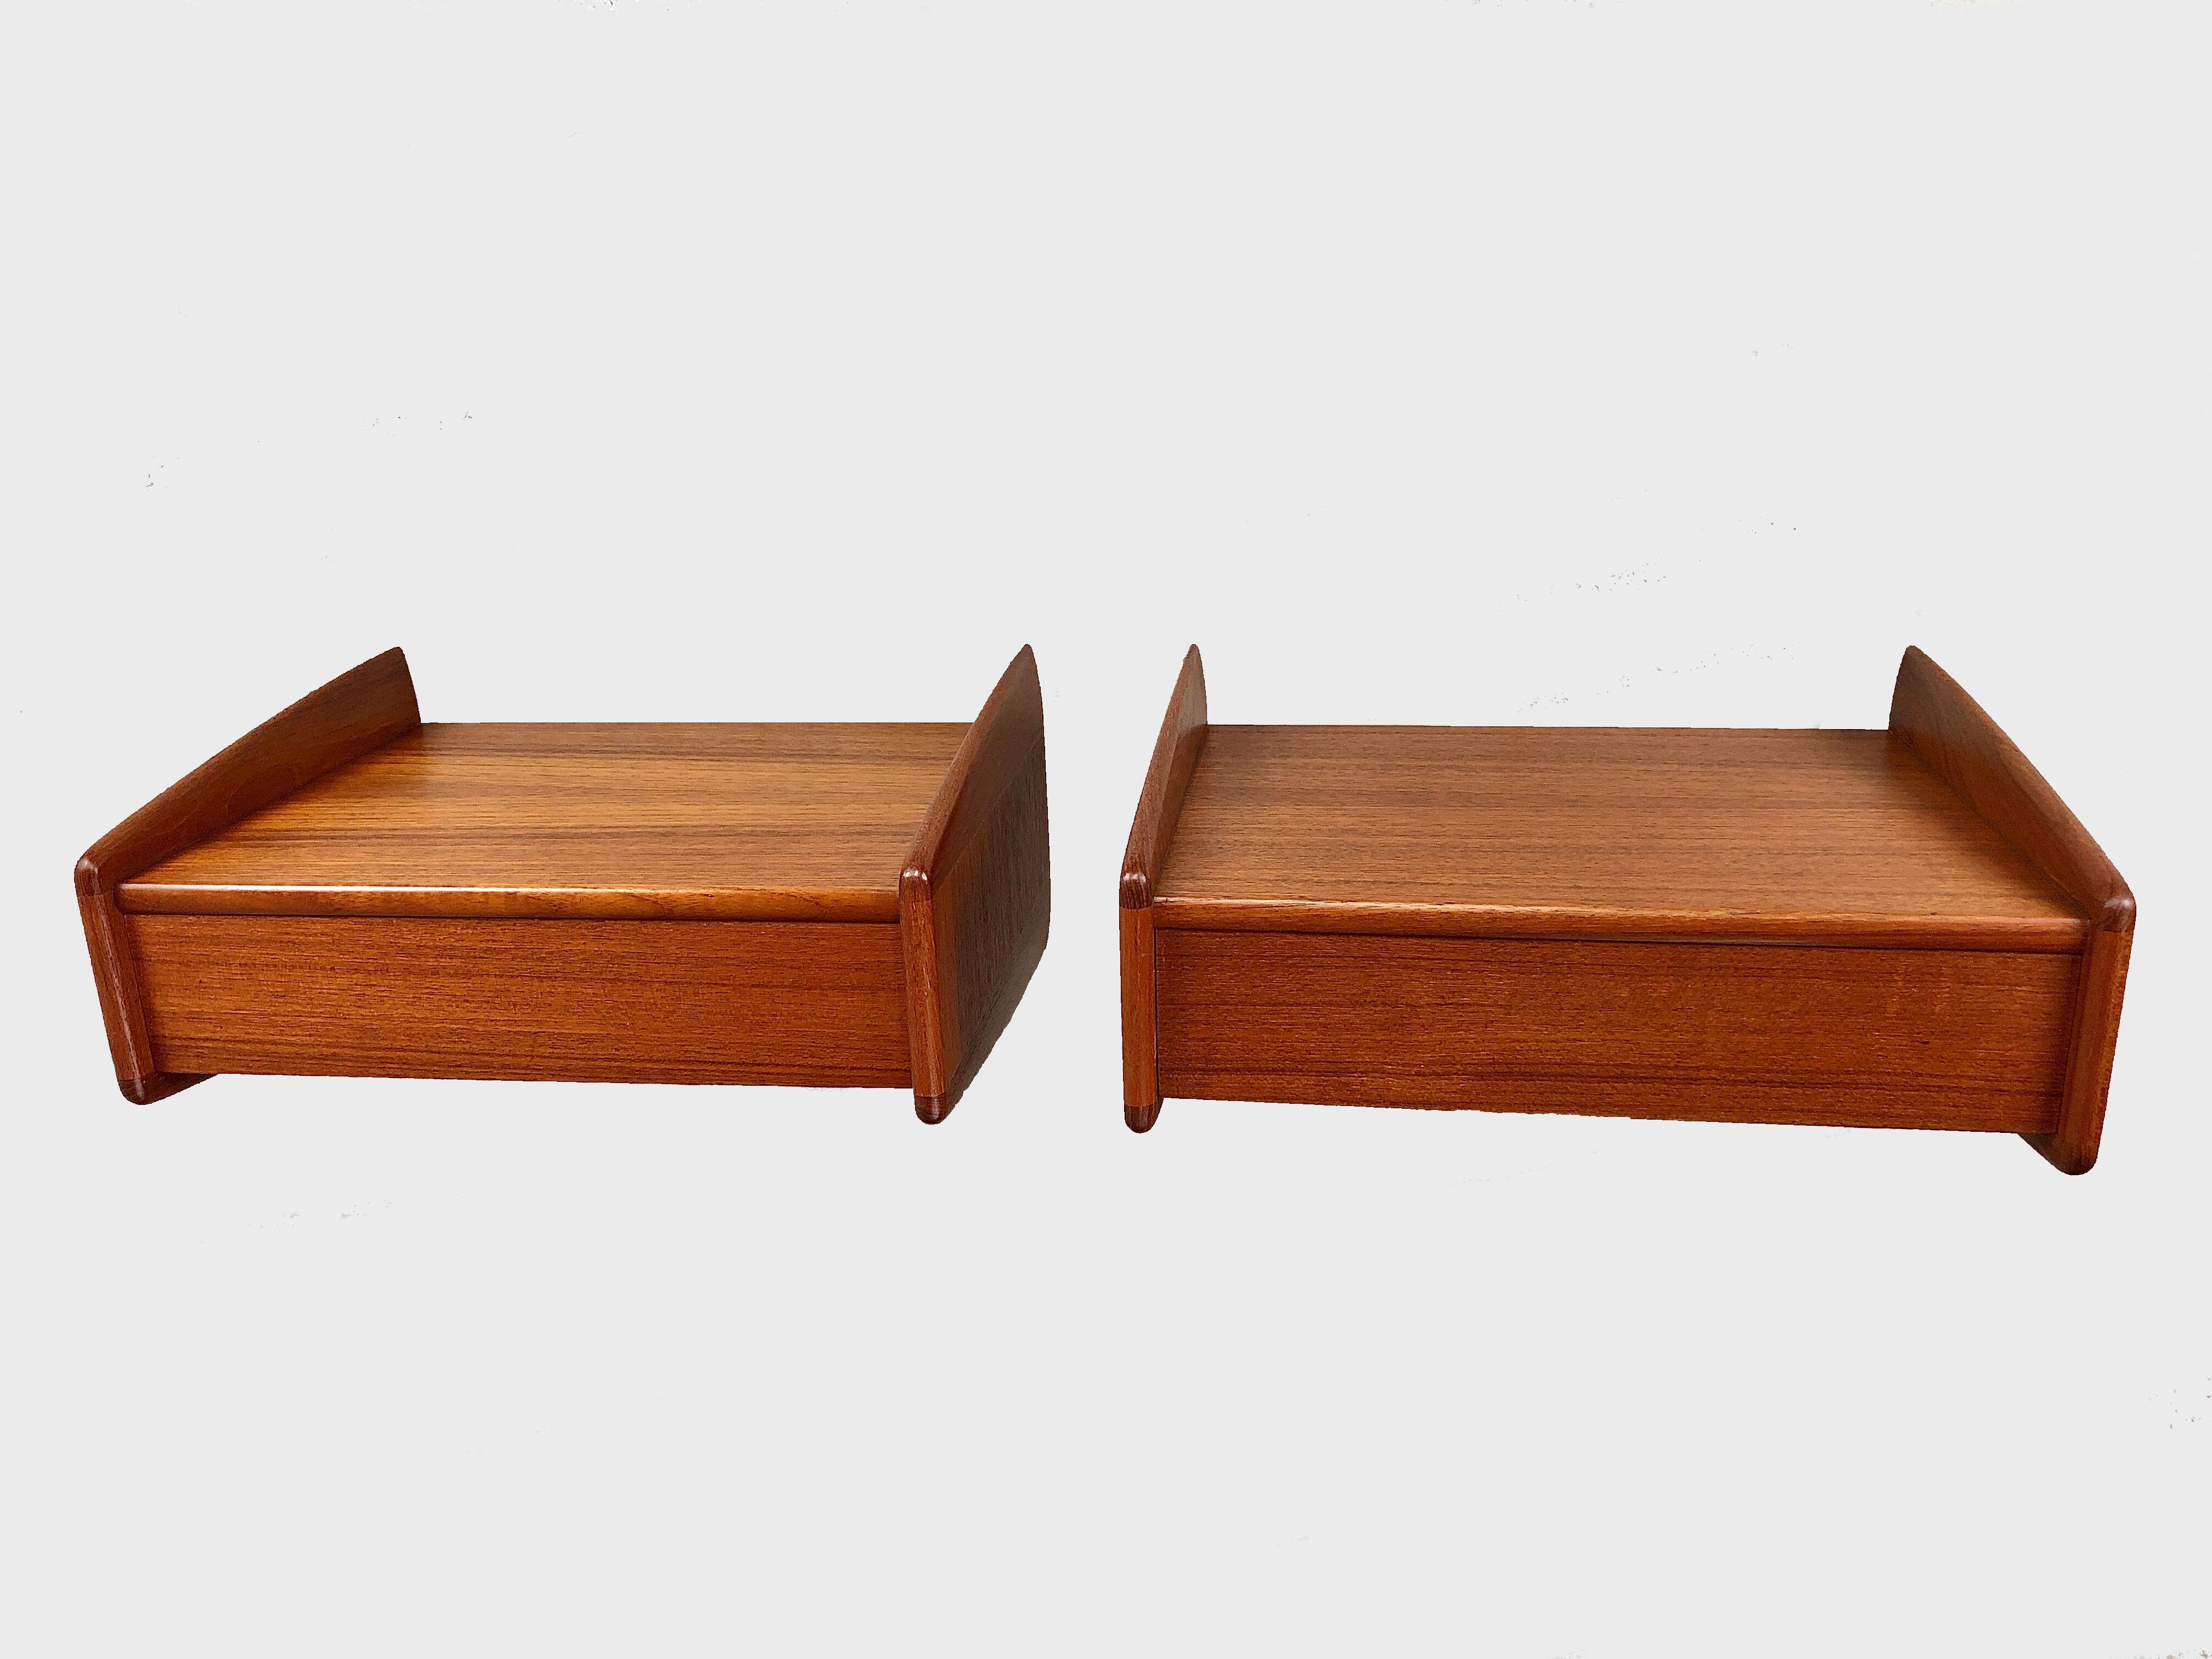 1960s set of two fully restored Danish Melvin Mikkelsen floating nightstands in teak

The well designed nightstands or shelves in teak, feature the elegant soft organic shapes and supreme craftmanship that that  characterized Melvin Mikkelsens